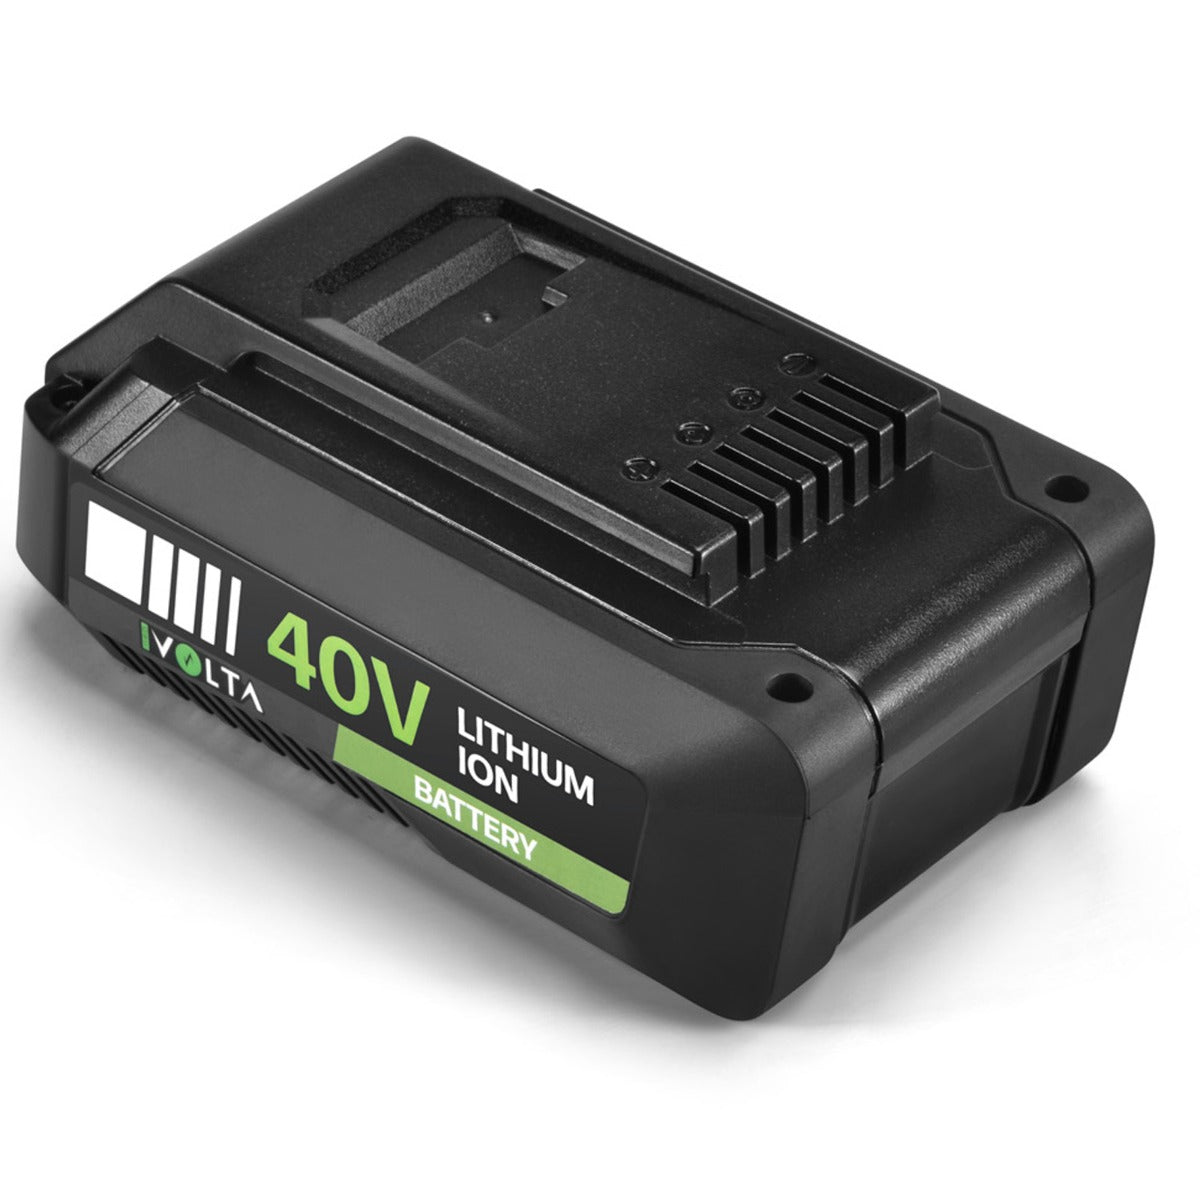 Neovolta 40V 4.0Ah Lithium-Ion Battery Pack Garden Tools LED Display